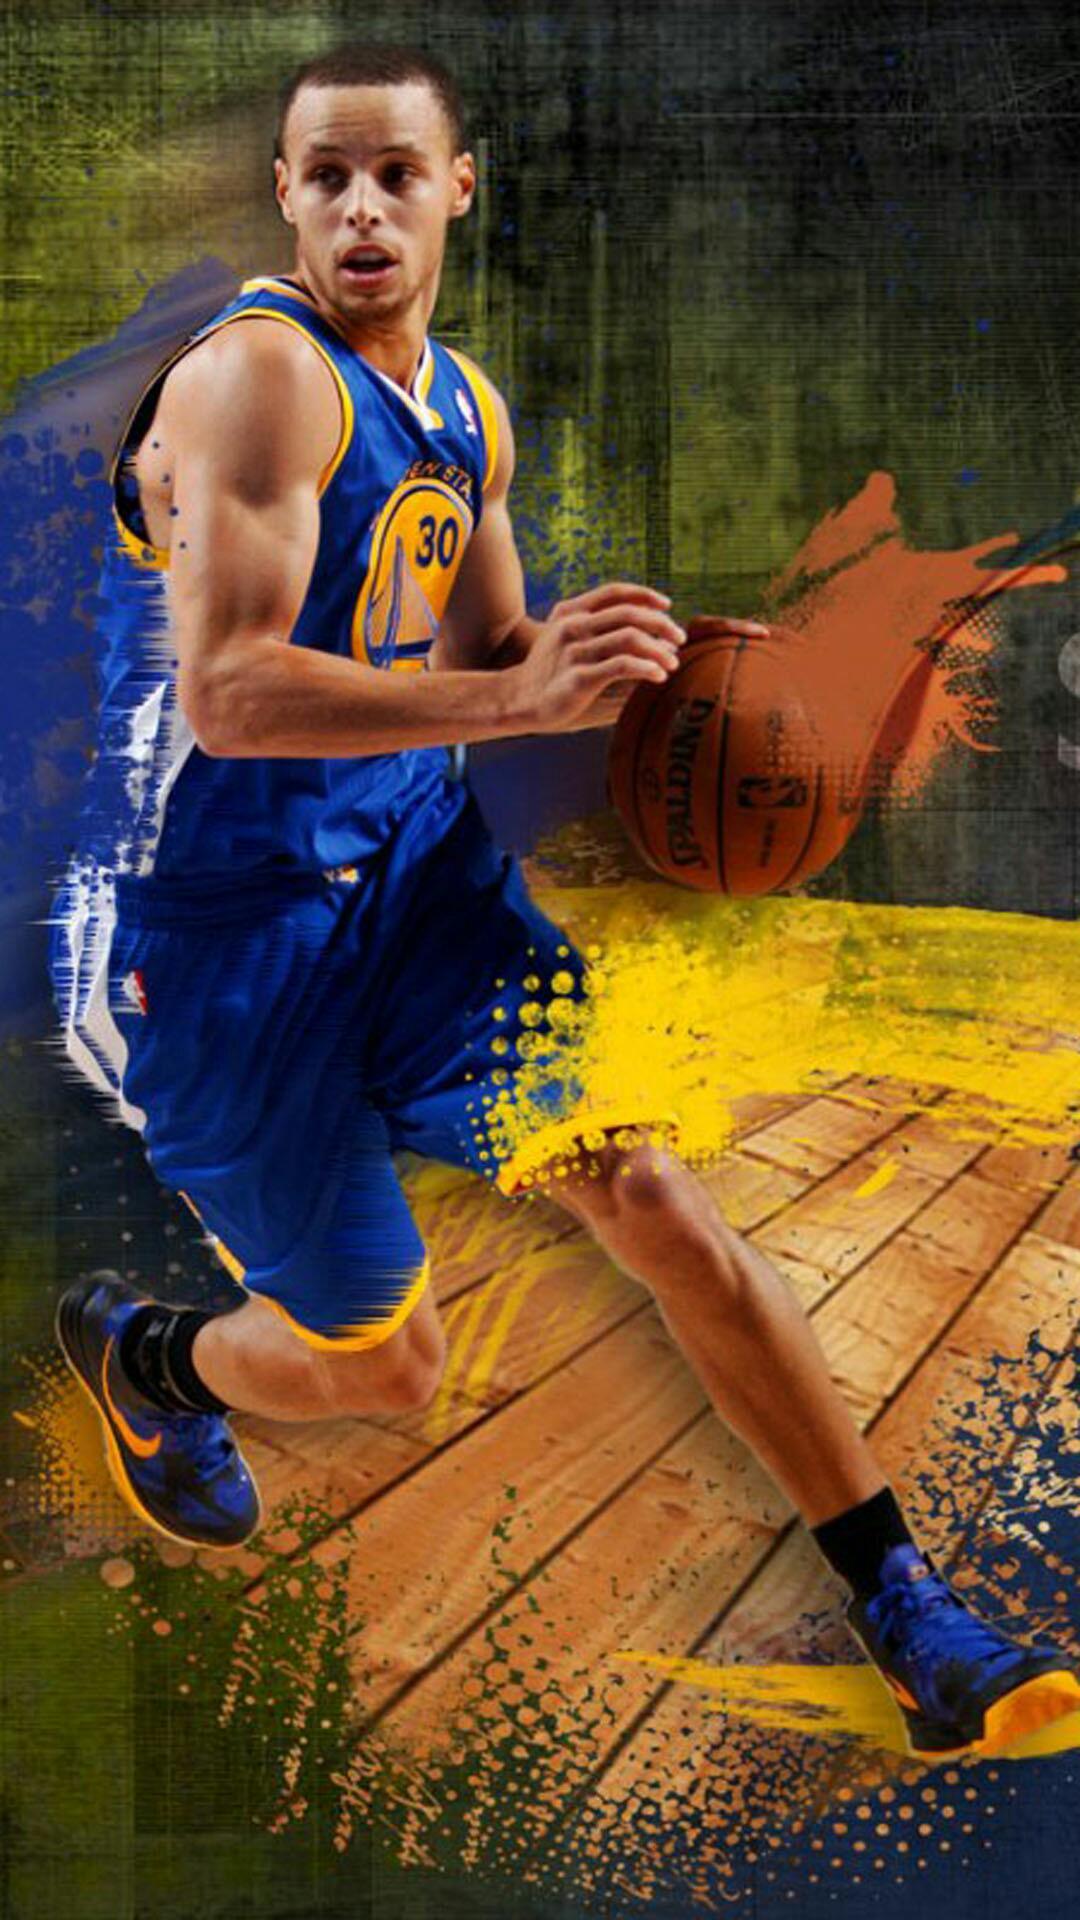 Wallpaper for Stephen Curry APK for Android Download